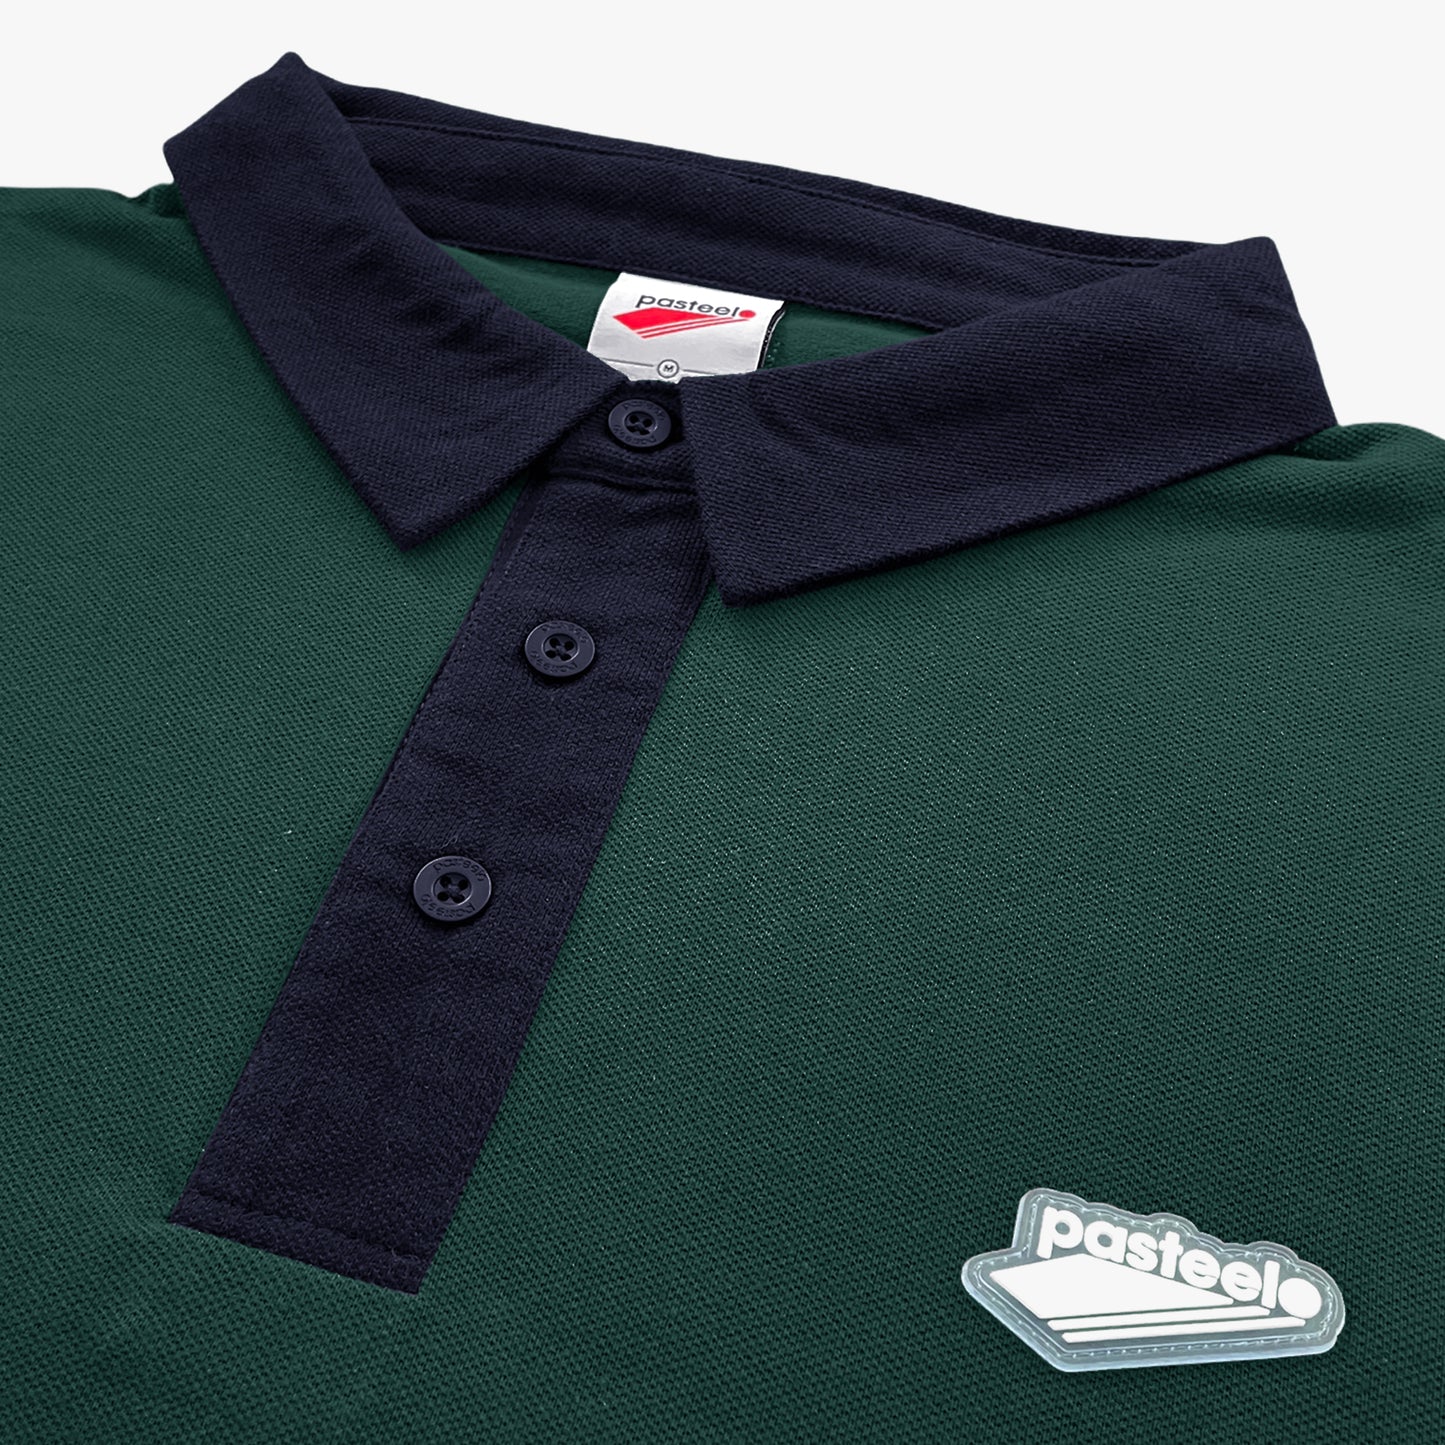 POLO SHIRT L/S - FOREST/NAVY